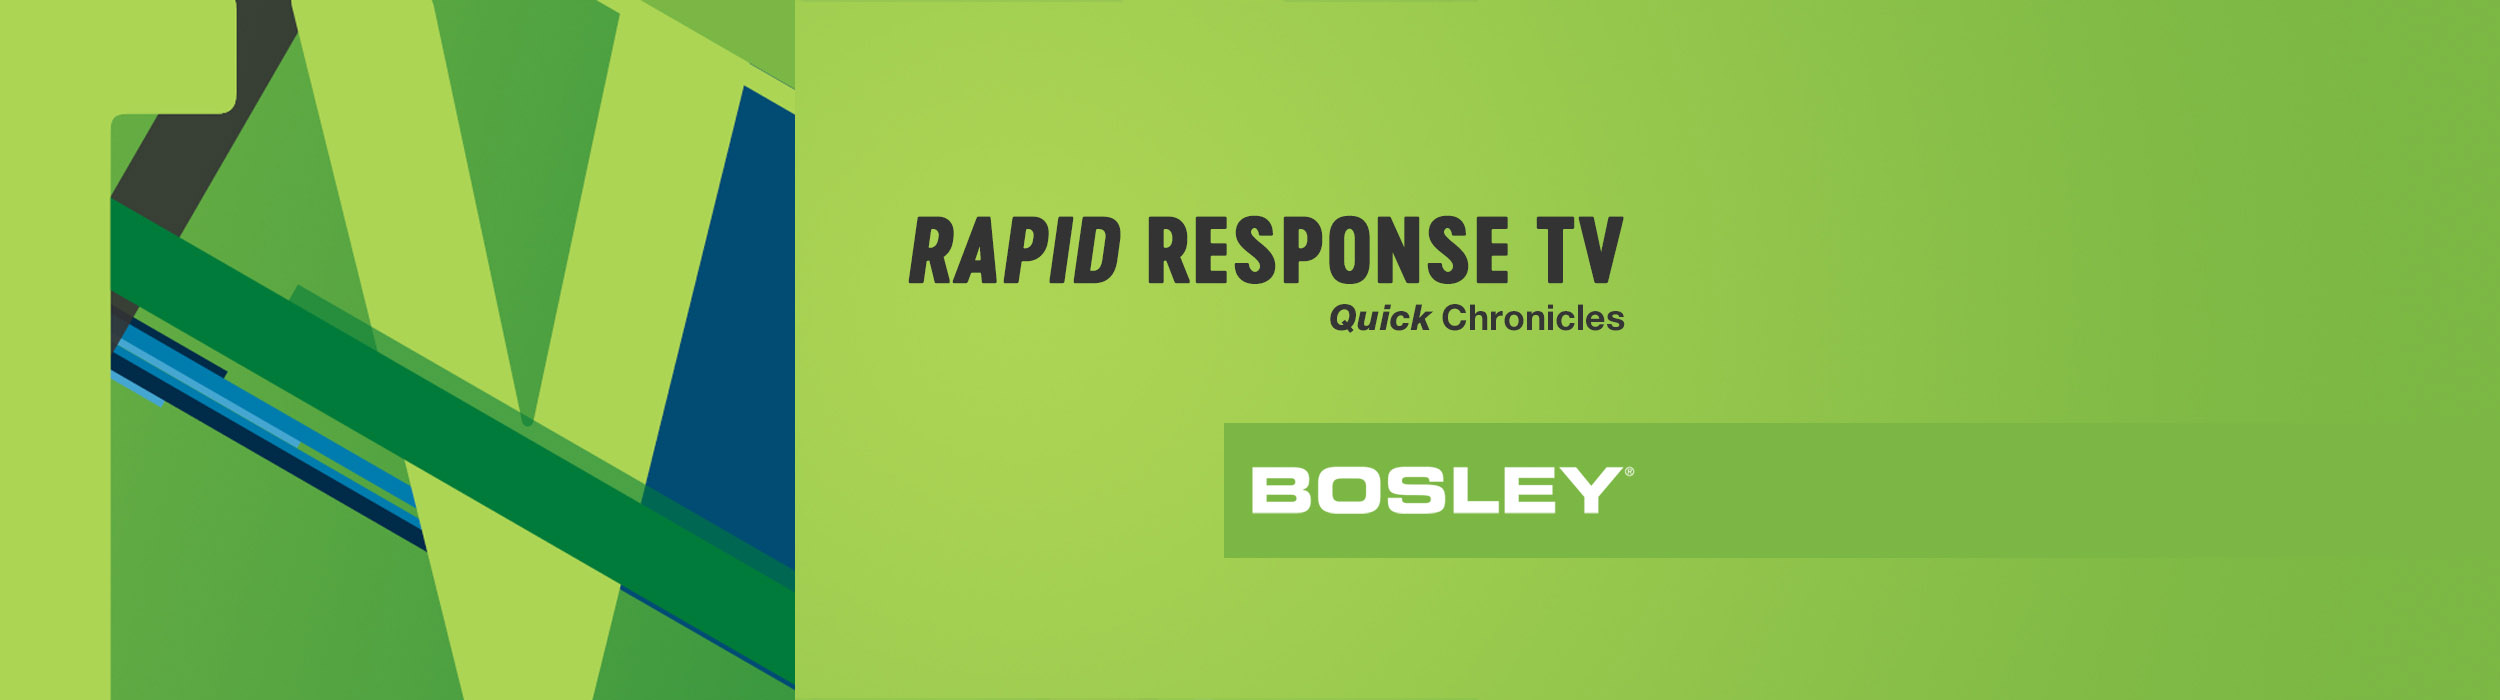 Quick Chronicles— Stories from Rapid Response TV: Bosley